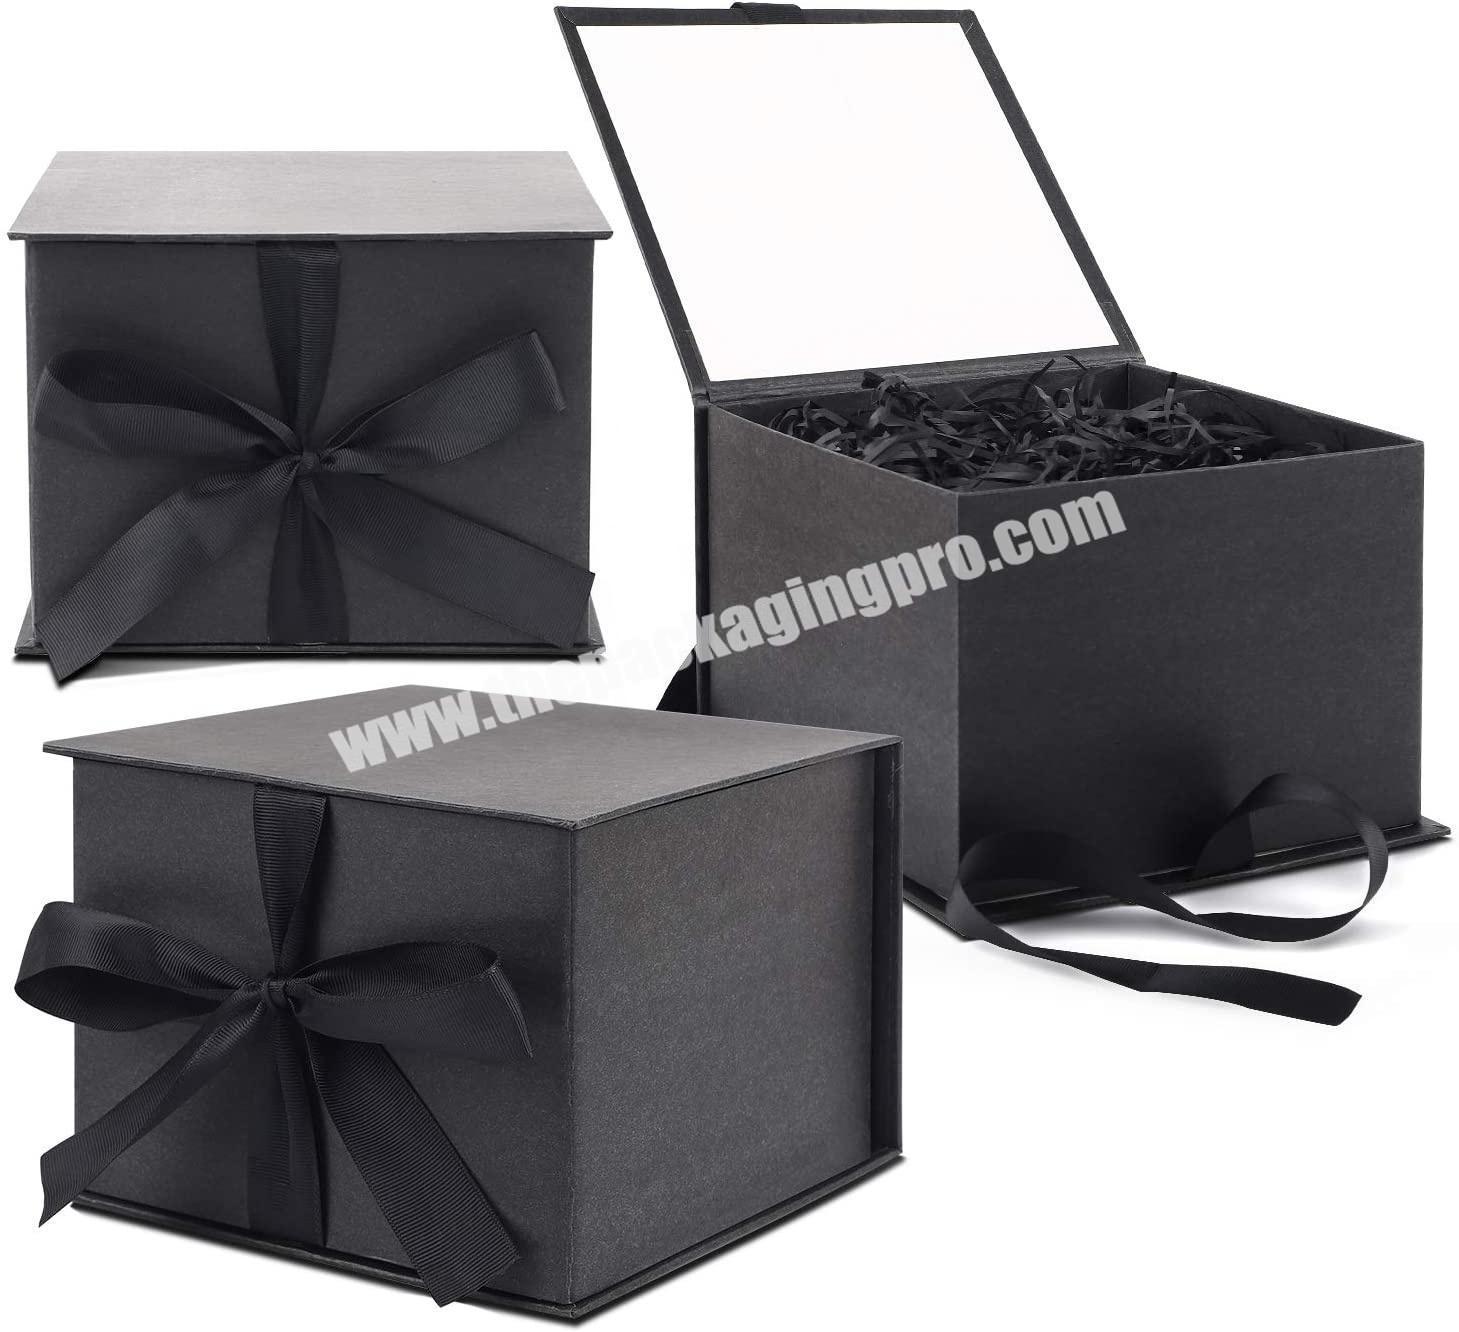 Large Black Gift Boxes with Lids and Filled with Shredded Paper for Wedding, Bridal, Birthday and Party